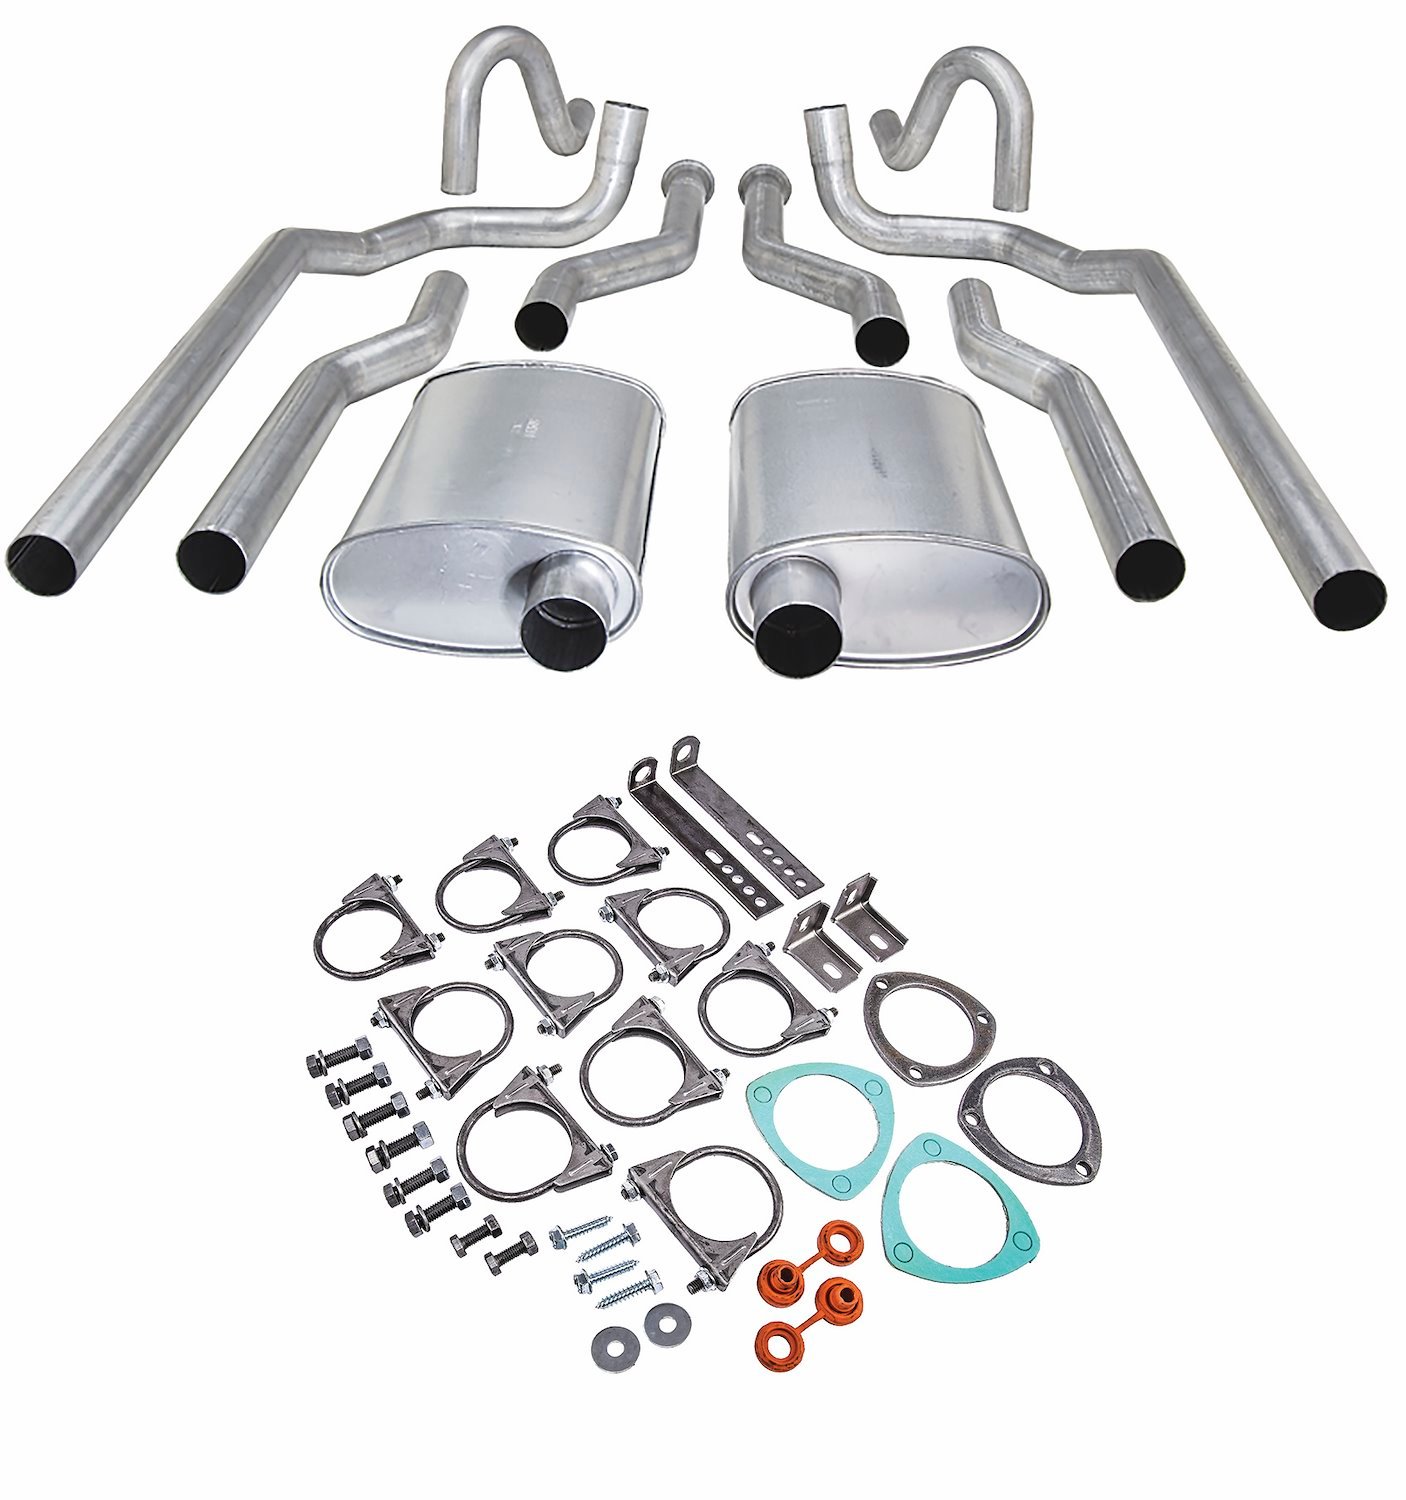 Header-Back Dual 2-1/2 in. Exhaust Kit 1964-1972 Chevelle/El Camino